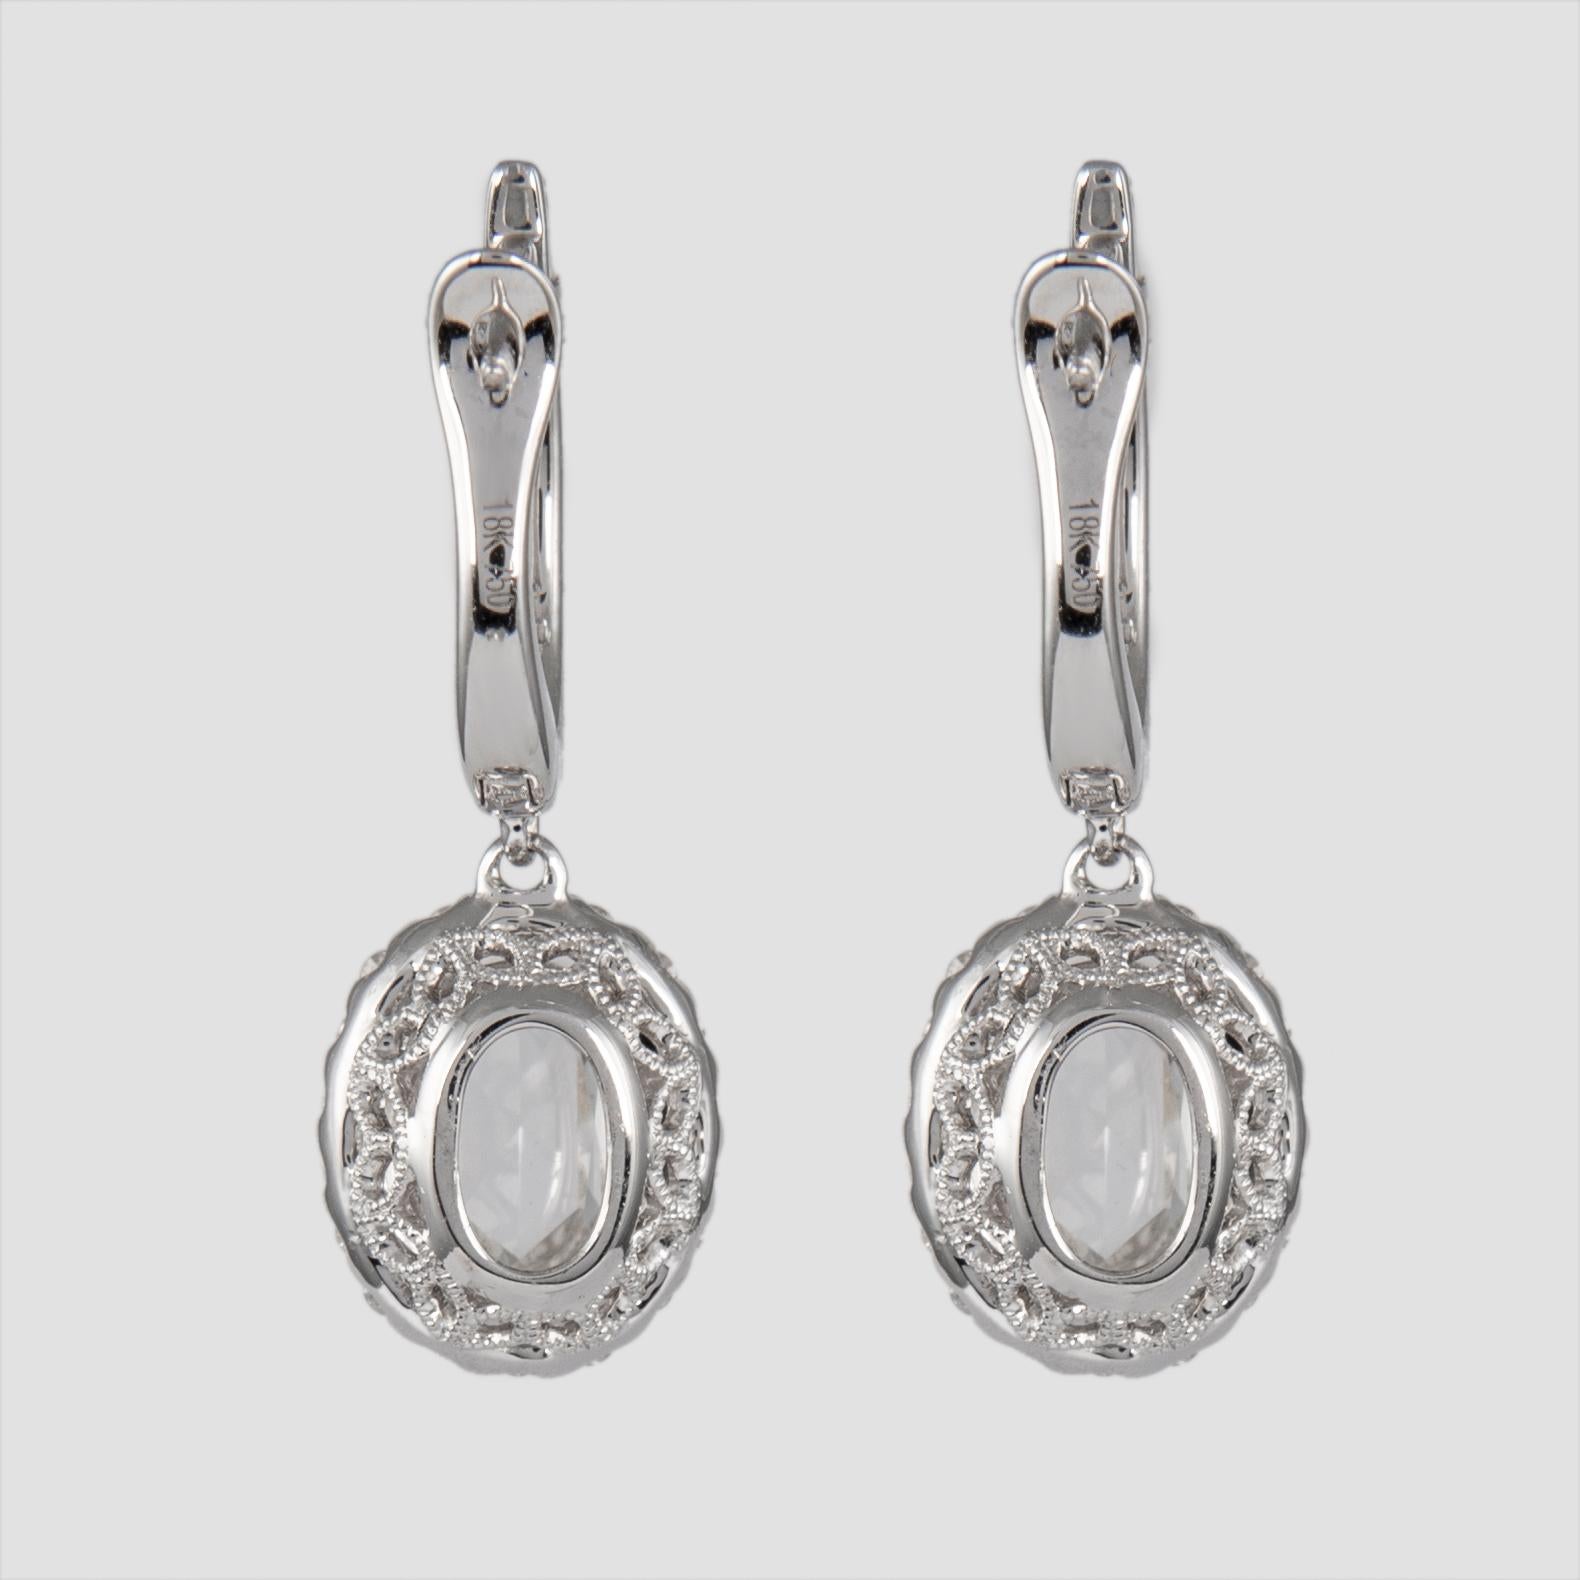 Contemporary 2.85ct Oval Rose Cut Diamond Drop Earrings with Halo 18k White Gold